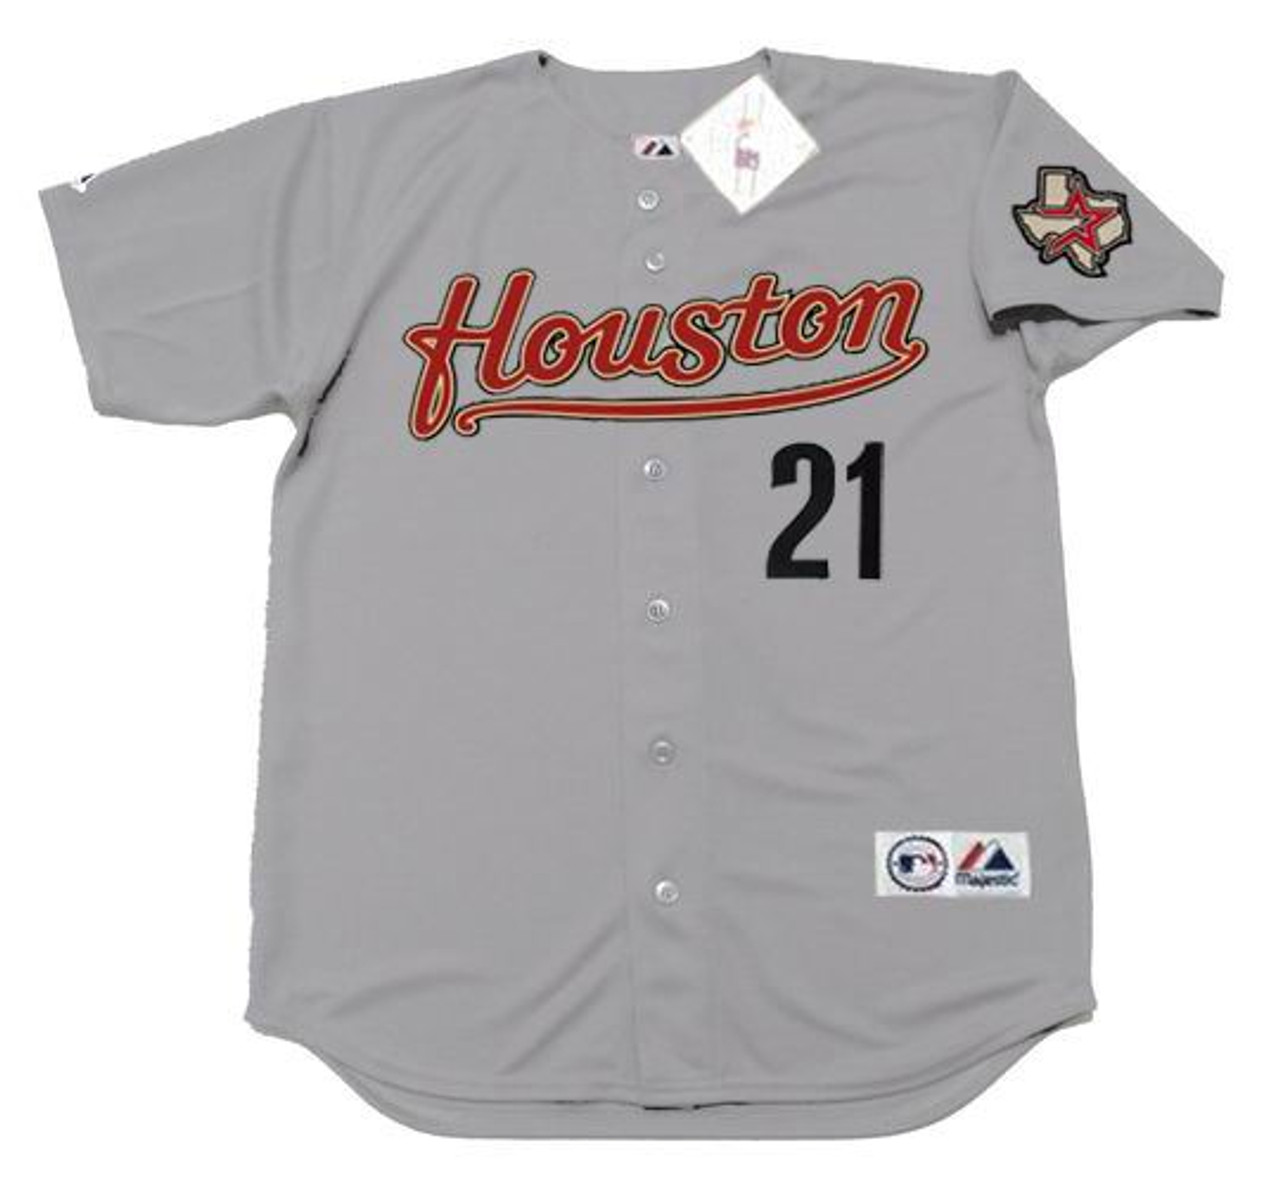 Andy Pettitte Jersey - 2005 Houston Astros Away Throwback MLB